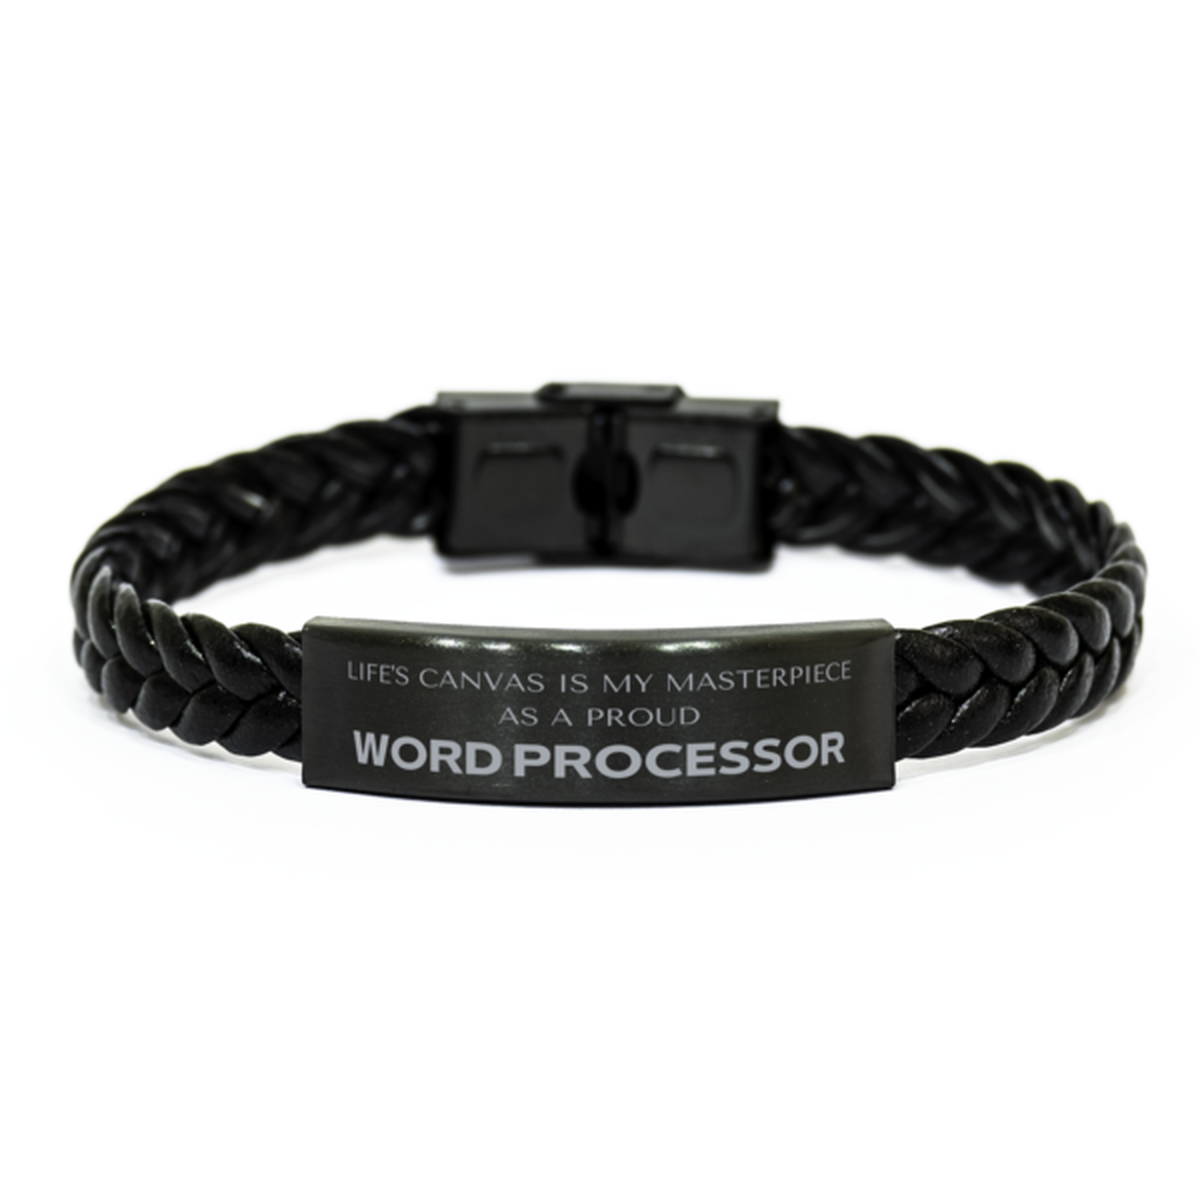 Proud Word Processor Gifts, Life's canvas is my masterpiece, Epic Birthday Christmas Unique Braided Leather Bracelet For Word Processor, Coworkers, Men, Women, Friends